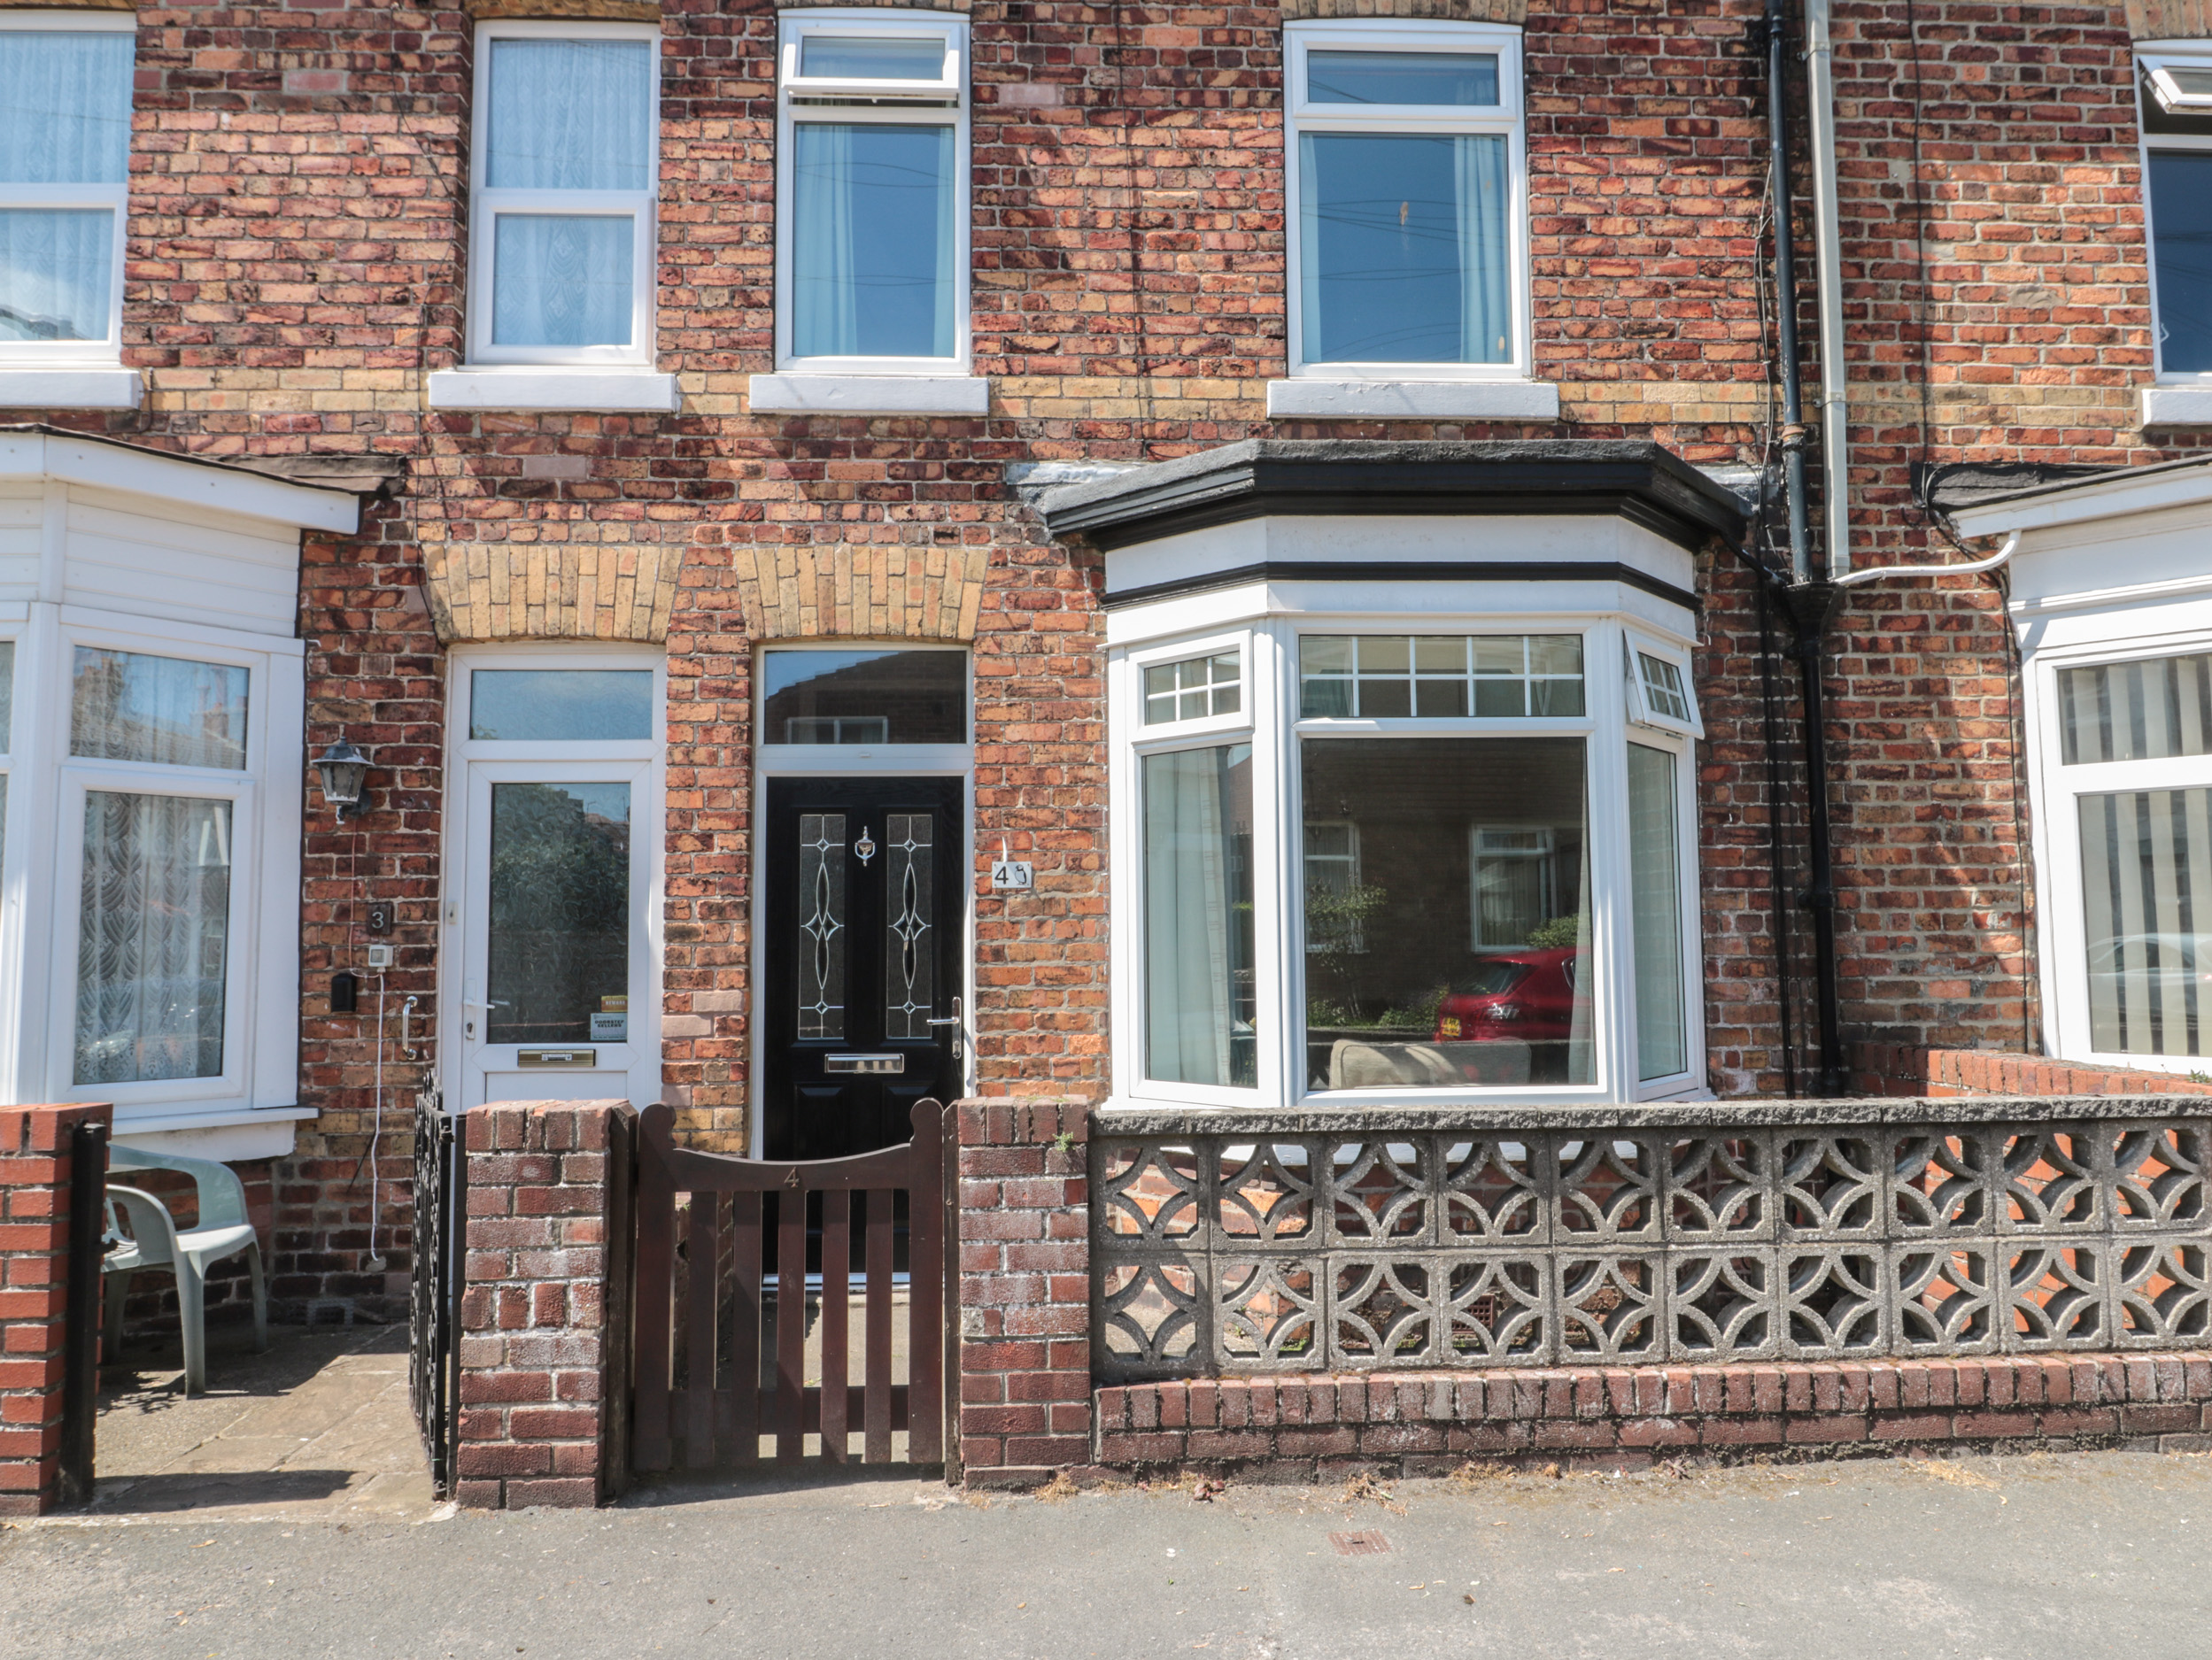 2 bedroom Cottage for rent in Filey